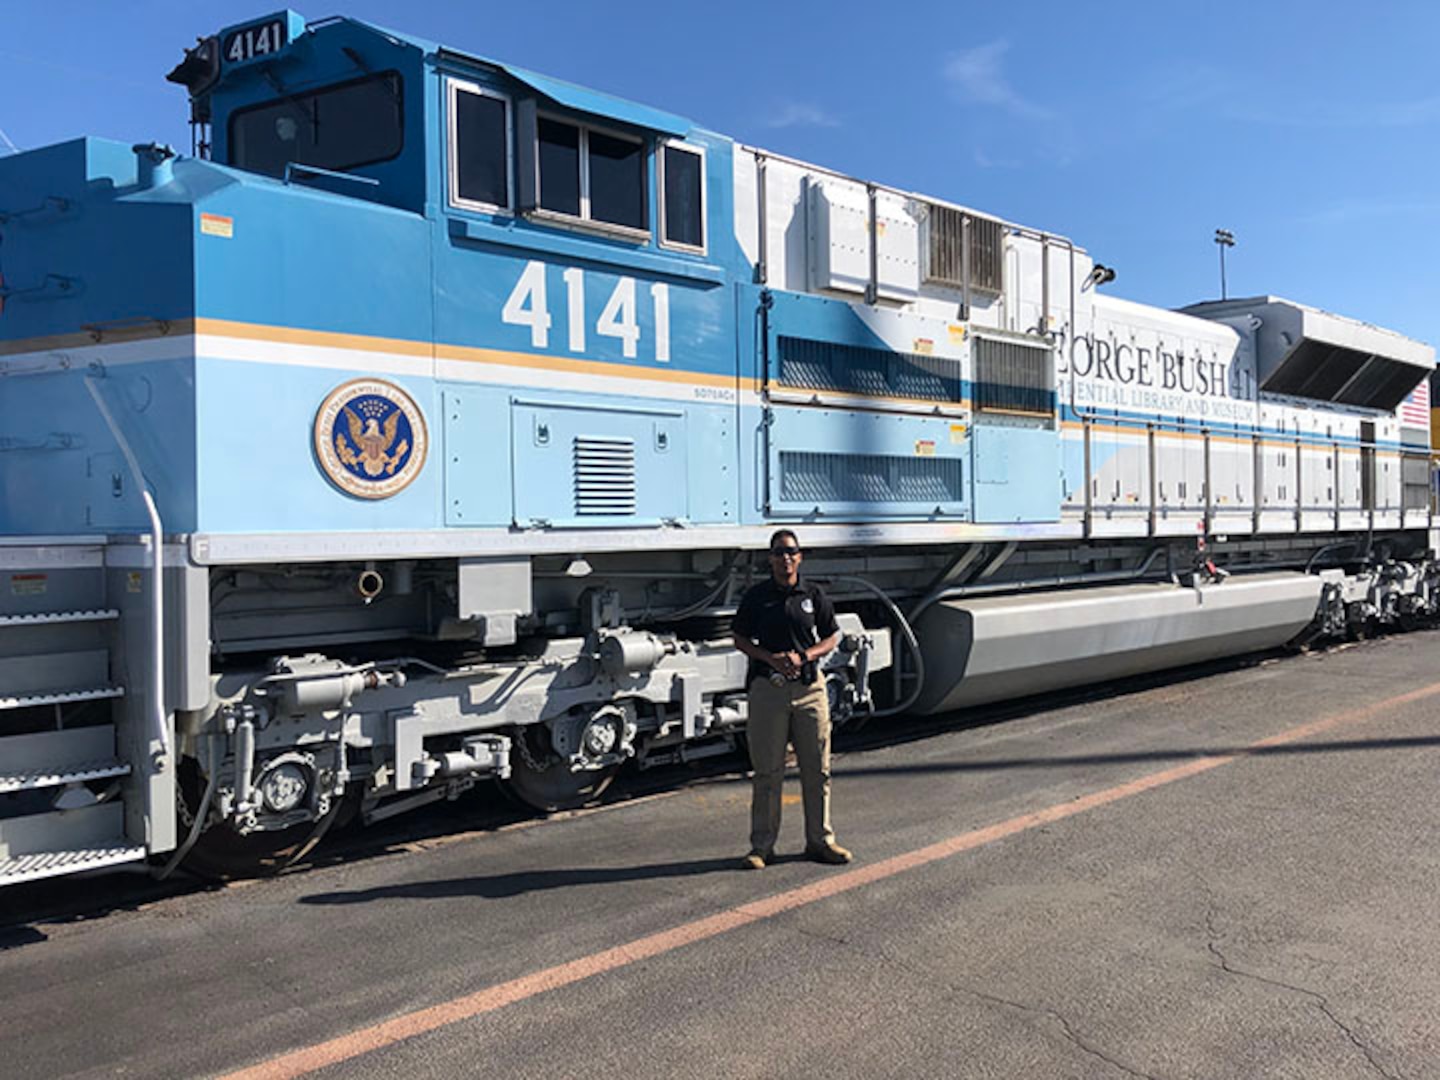 Master Sgt. Shana Cobbs in front of the George Bush 4141 Locomotive Dec. 3, 2018, in Spring, Texas Cobbs provided security for the locomotive during the Bush funeral detail, securing the areas prior to arrival at each location.